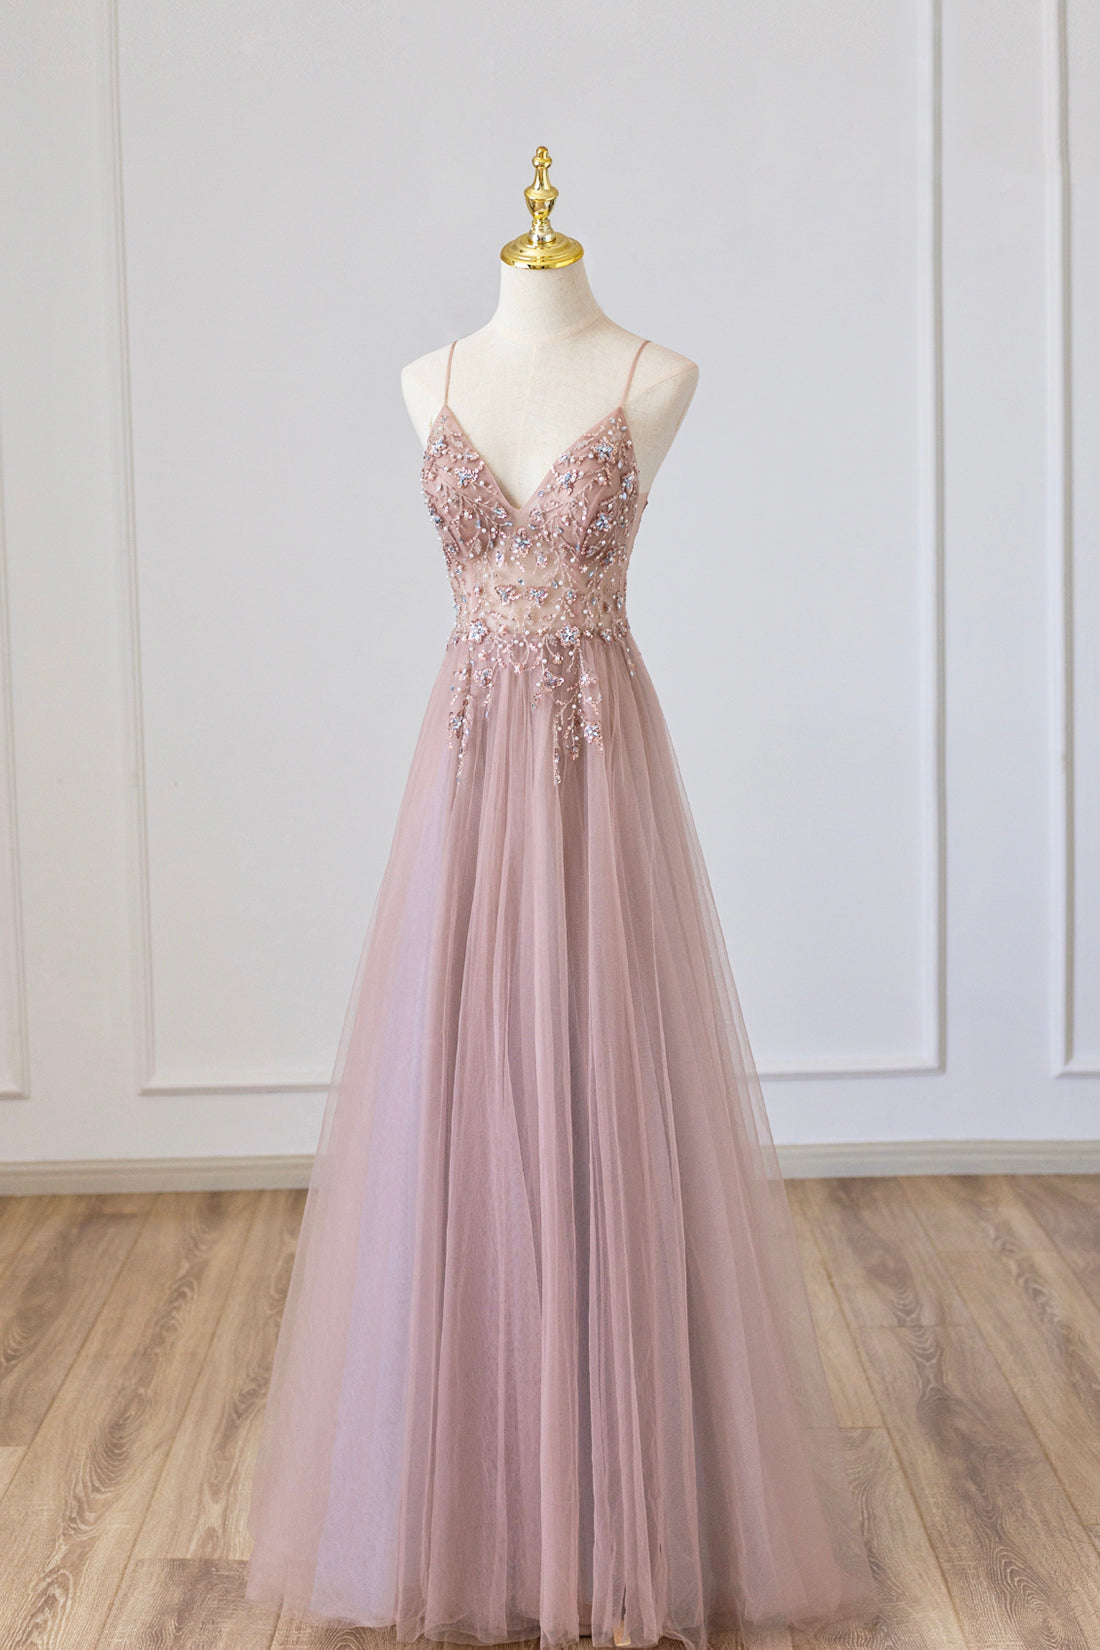 Yareli | Pink Tulle Long A-Line Prom Dress, Pink Spaghetti Formal Dress with Beaded